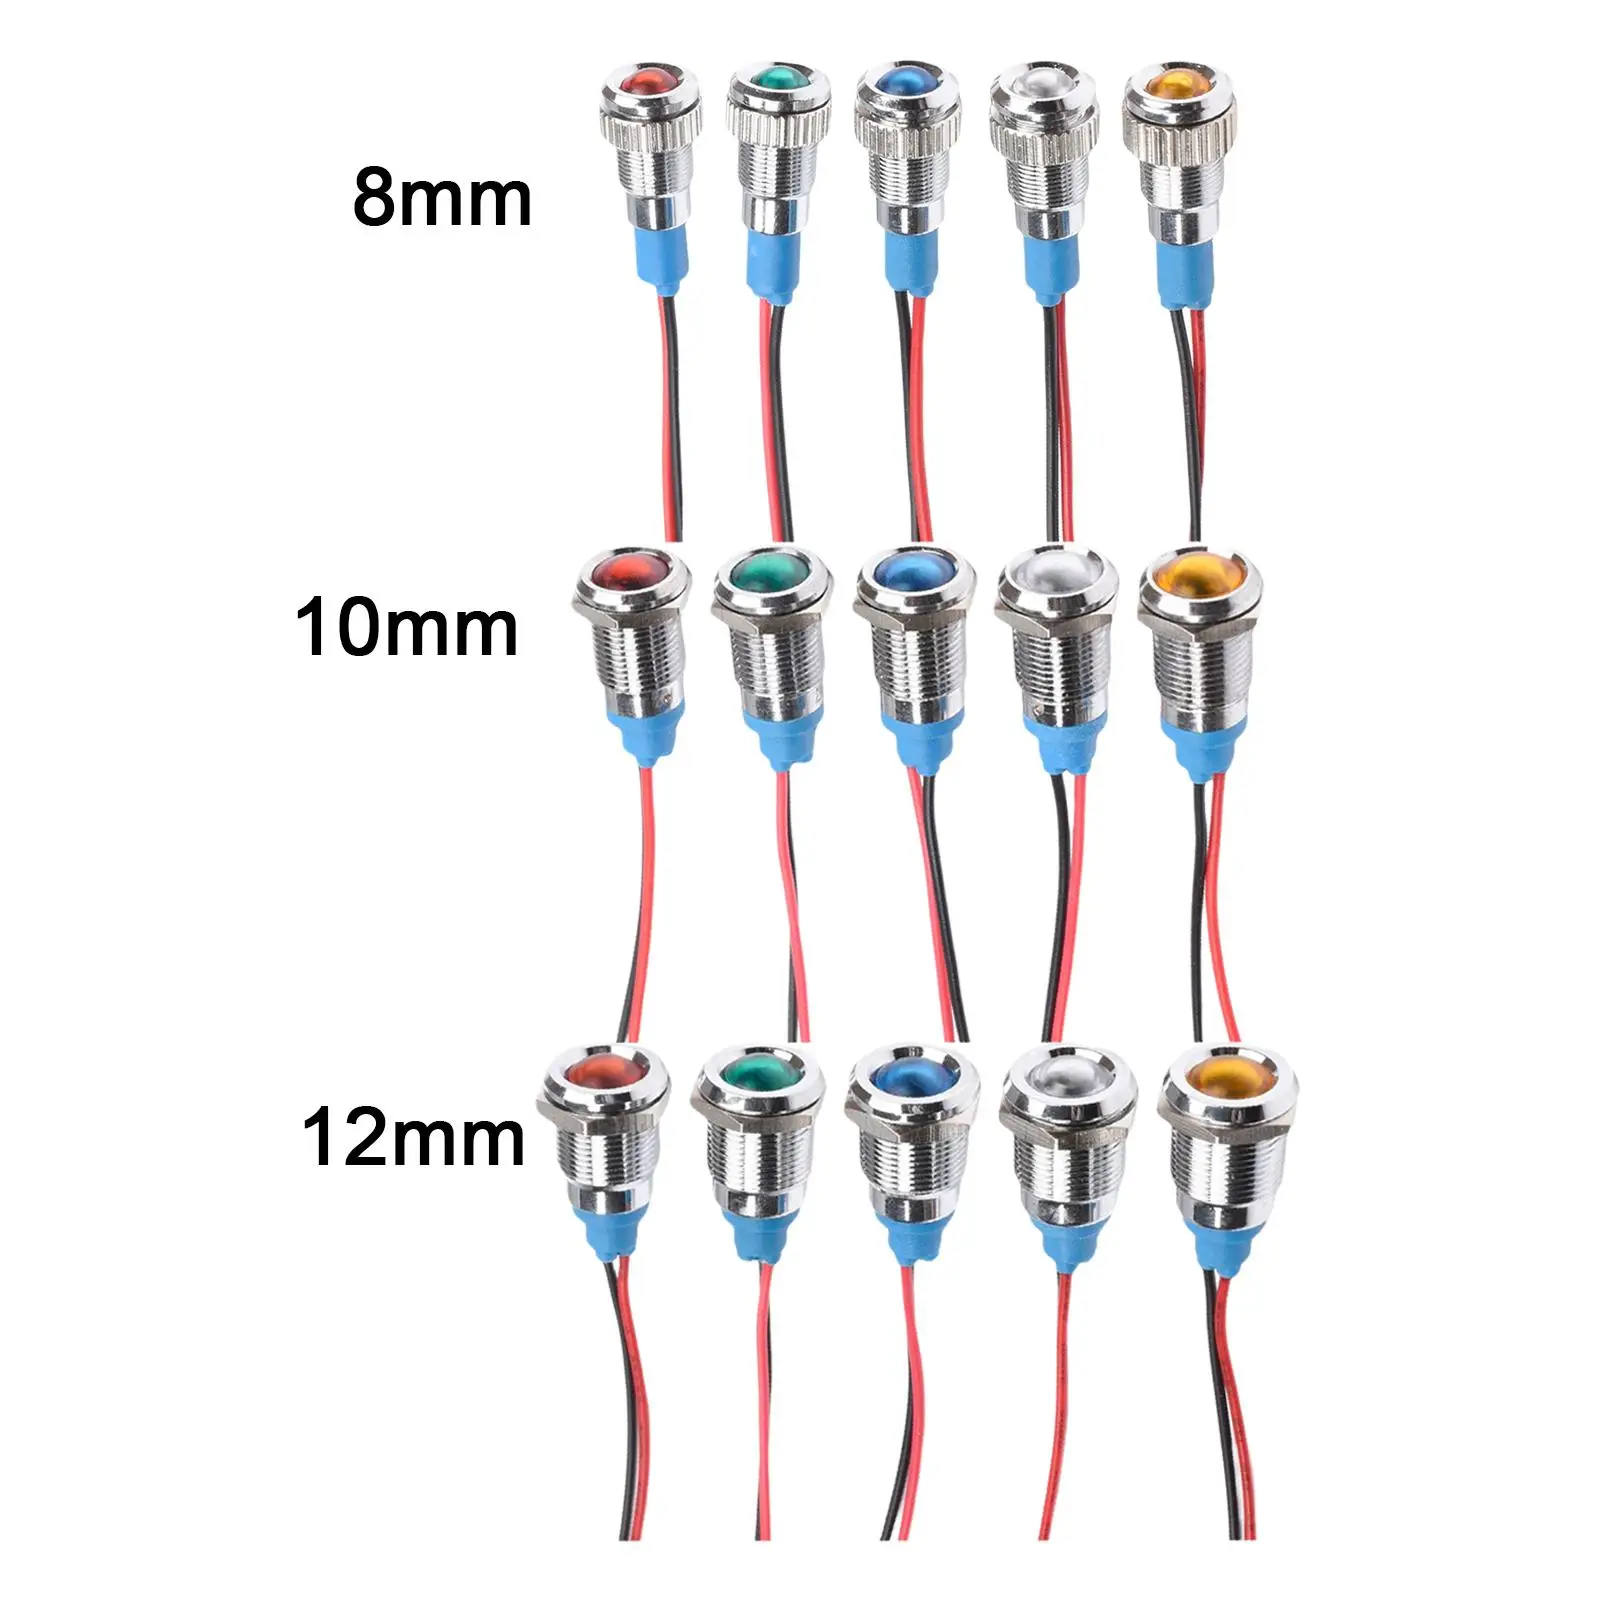 5 Pieces LED Metal Indicator Light, with Wire Lamp Waterproof for Motorcycle Car Pilots Directional Light Boat Truck